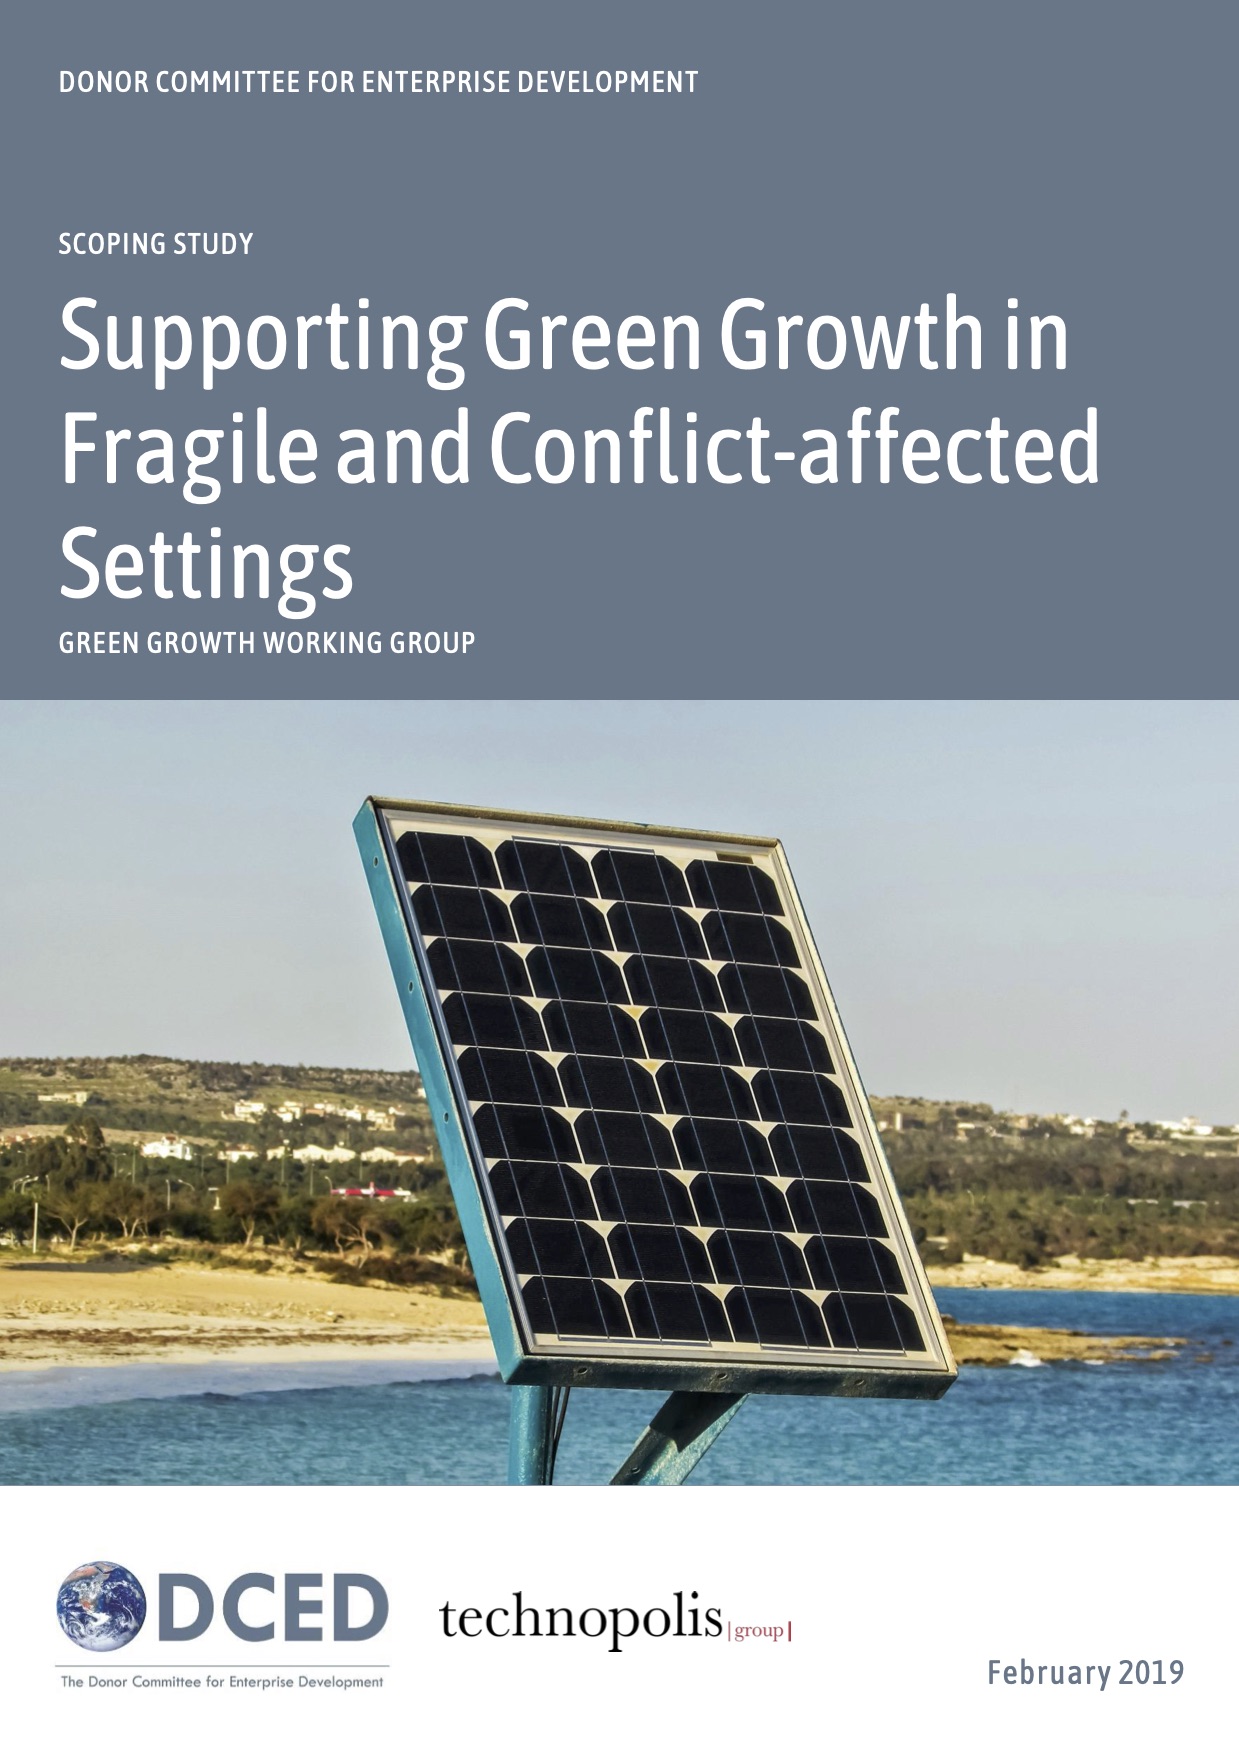 Supporting Green Growth in Fragile and Conflict-affected Settings